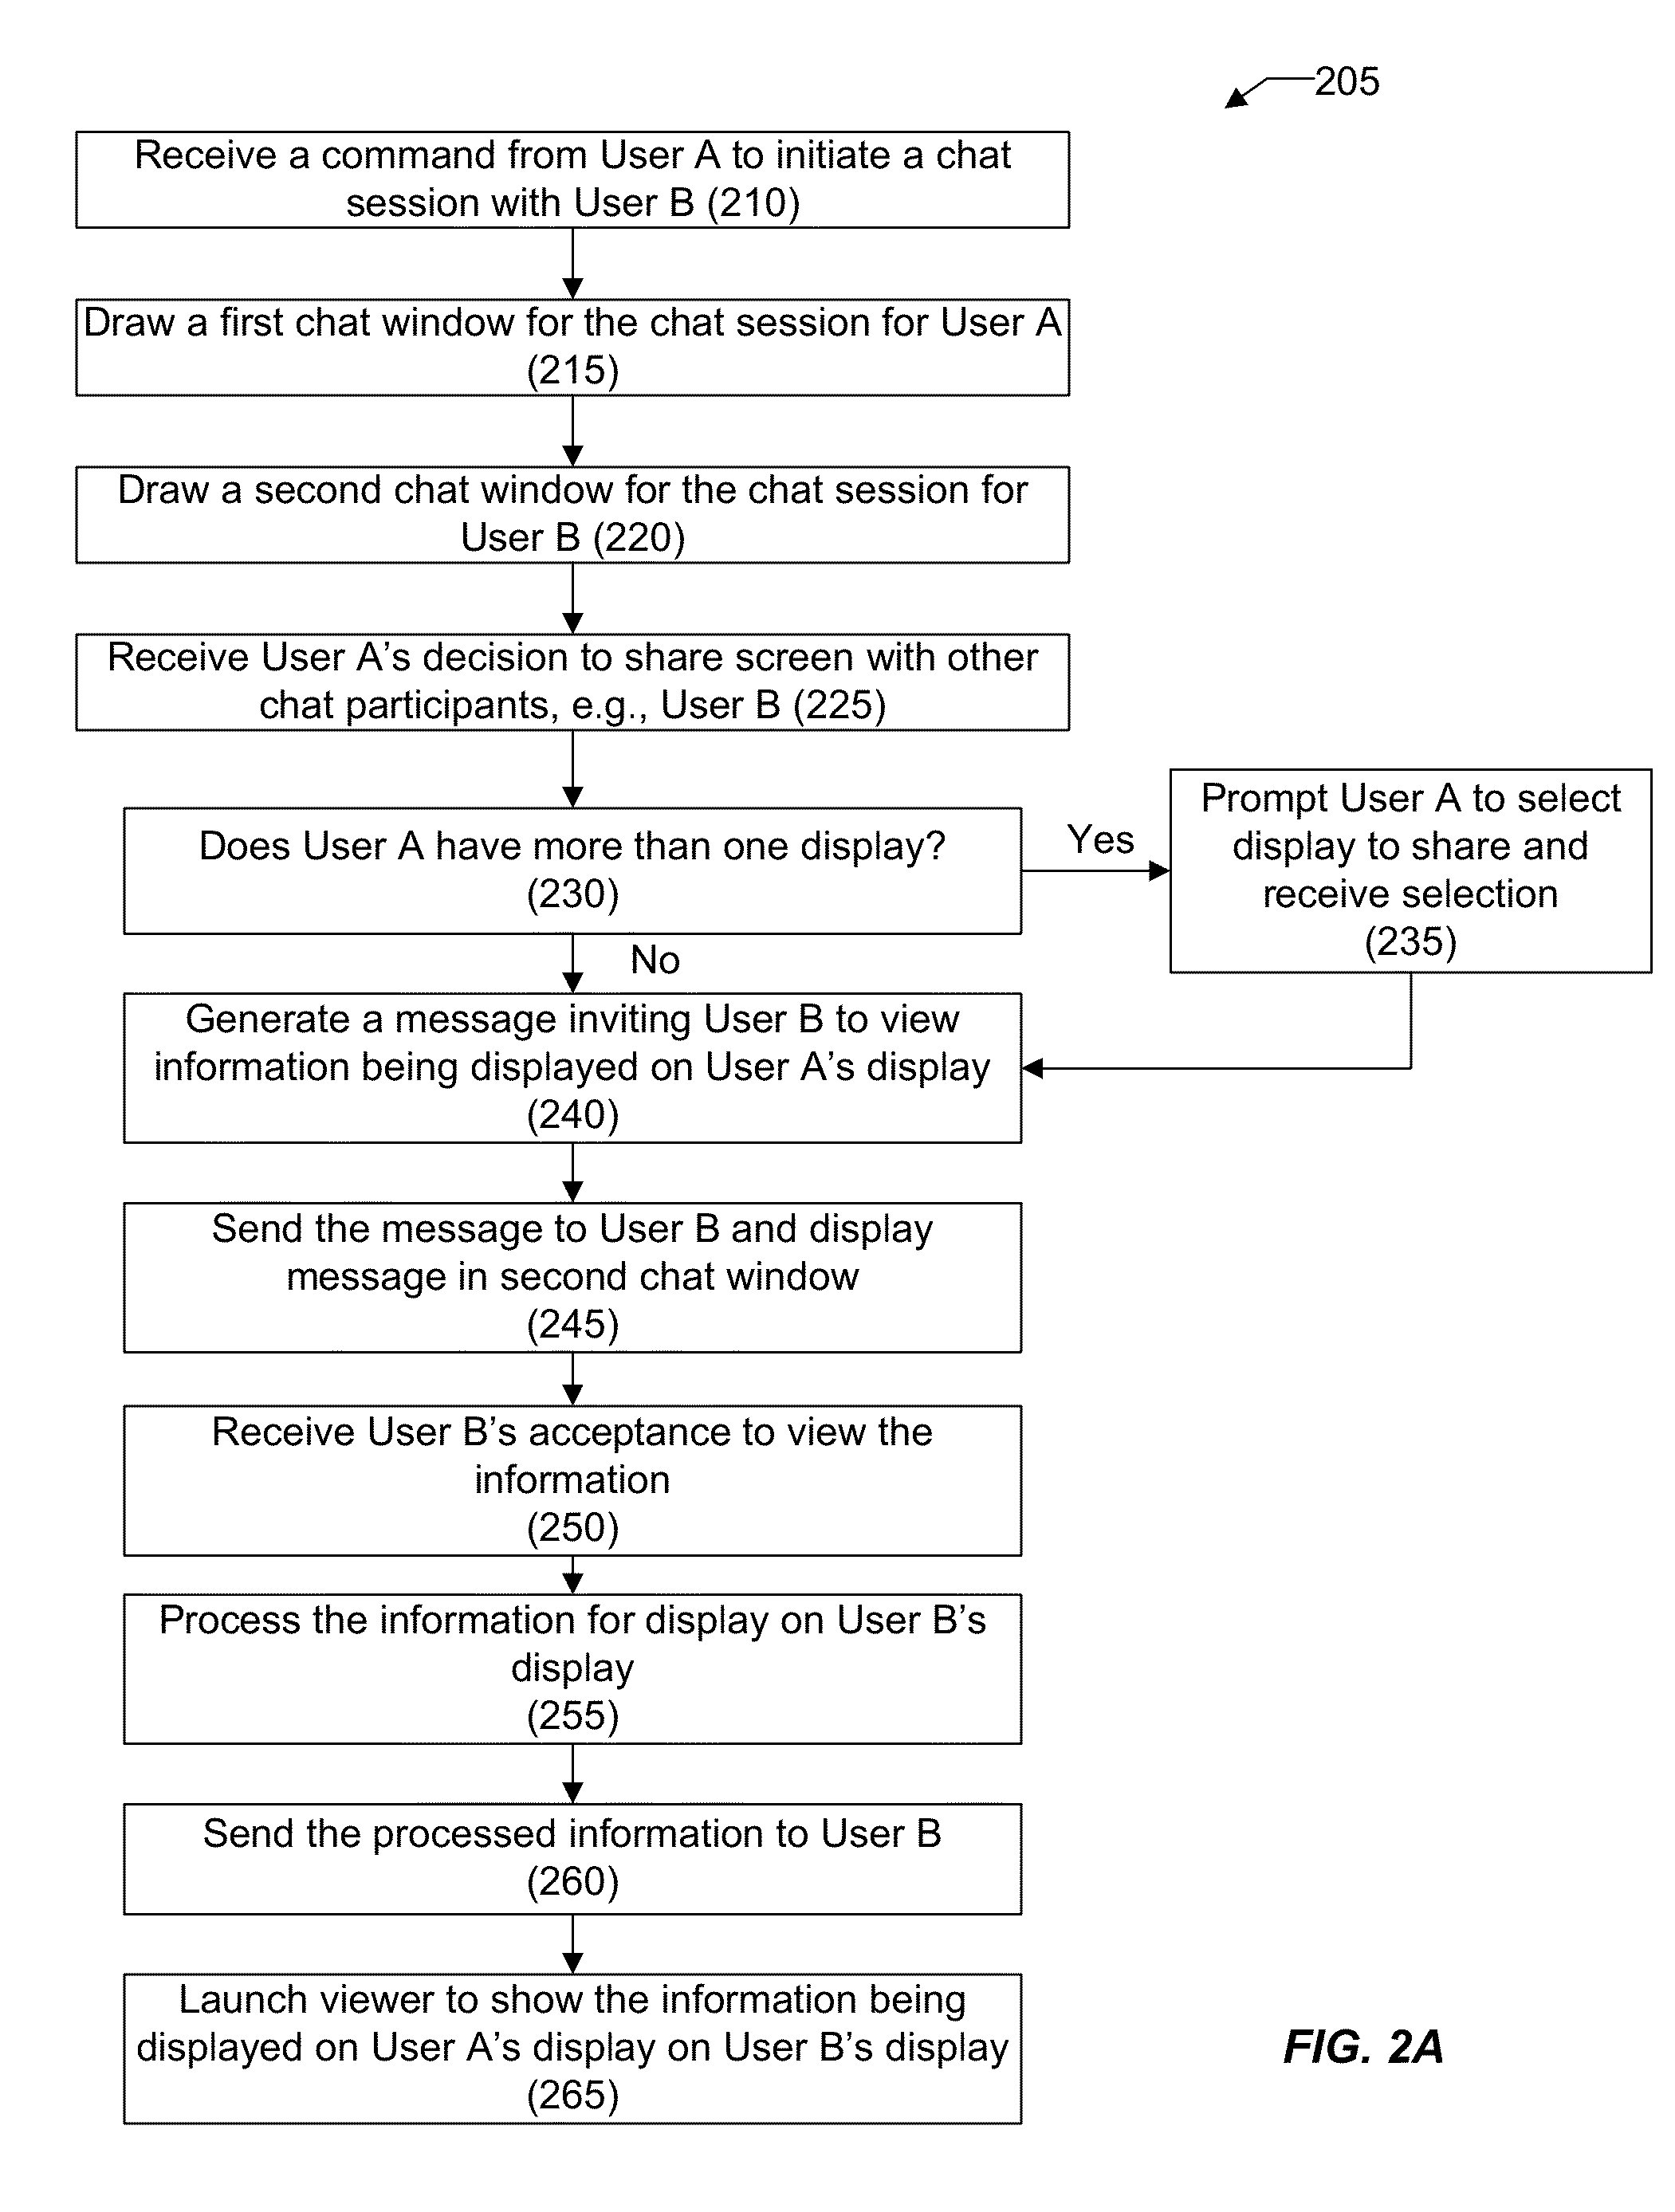 Providing active screen sharing links in an information networking environment